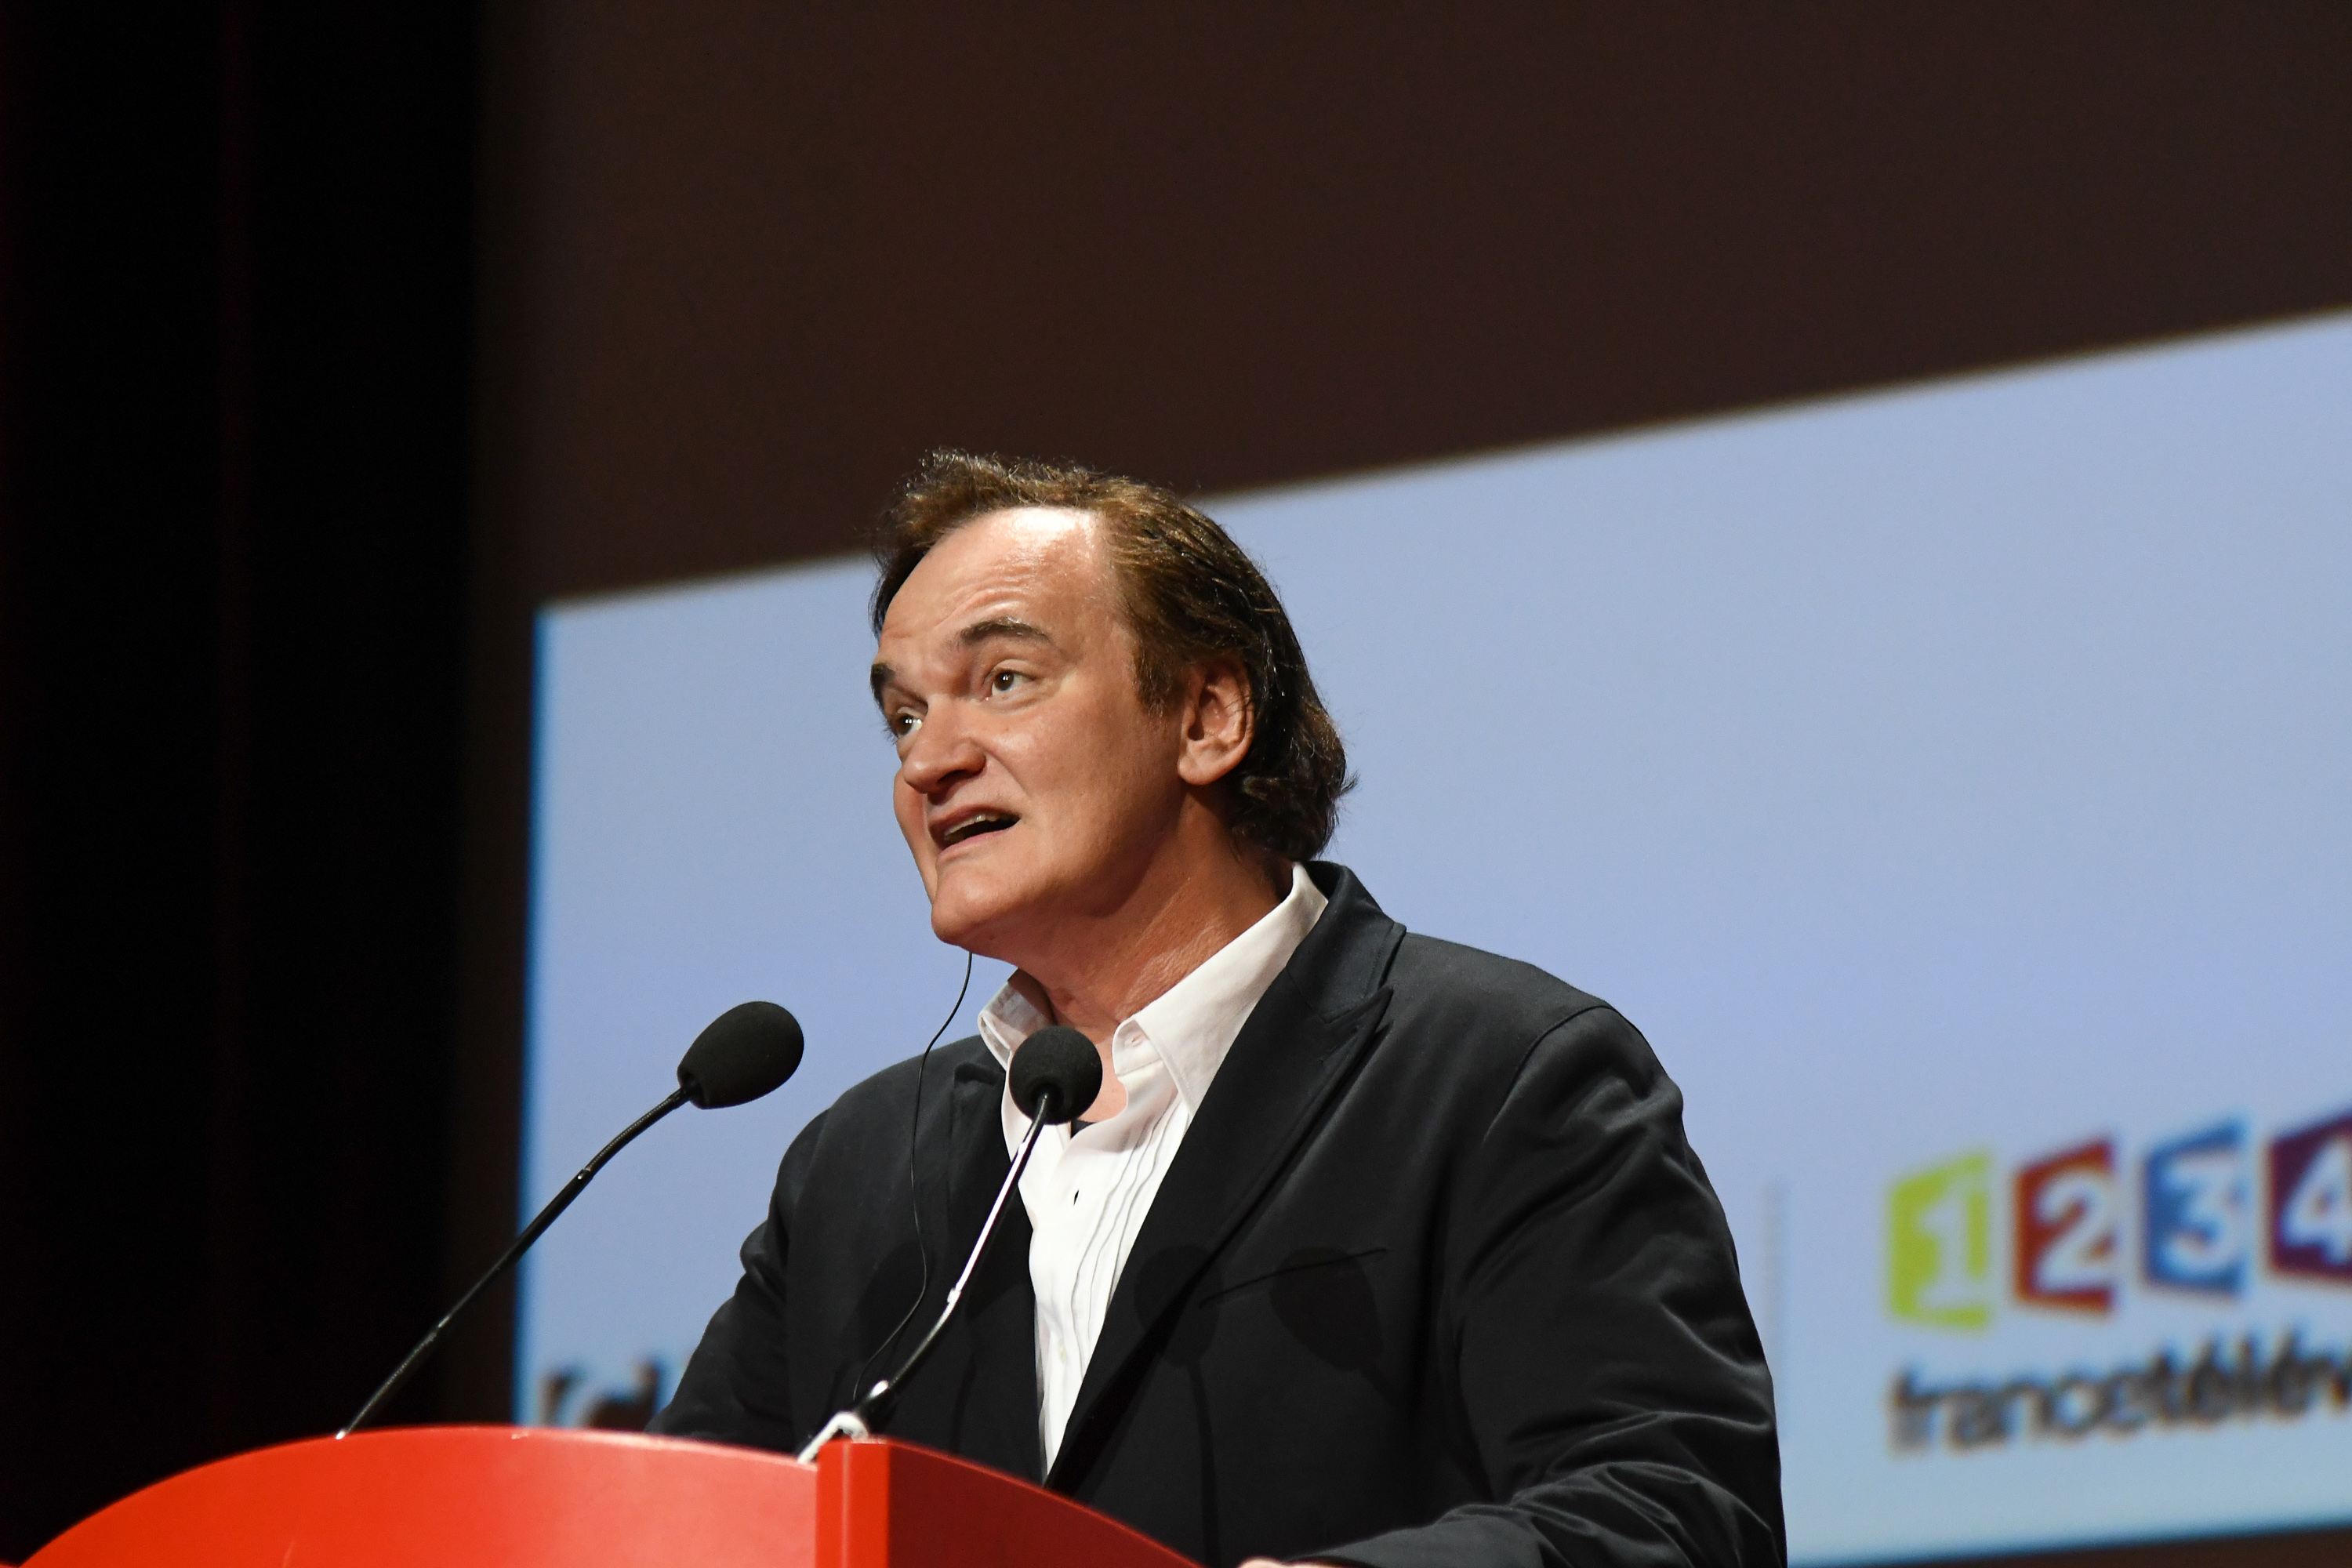 Quentin Tarentino delivers a speech during the "Prix Lumiere 2016" award during the 8th Film Festival Lumiere In Lyon, Fracne, Oct. 14, 2016. (Dominique Charriau—WireImage)